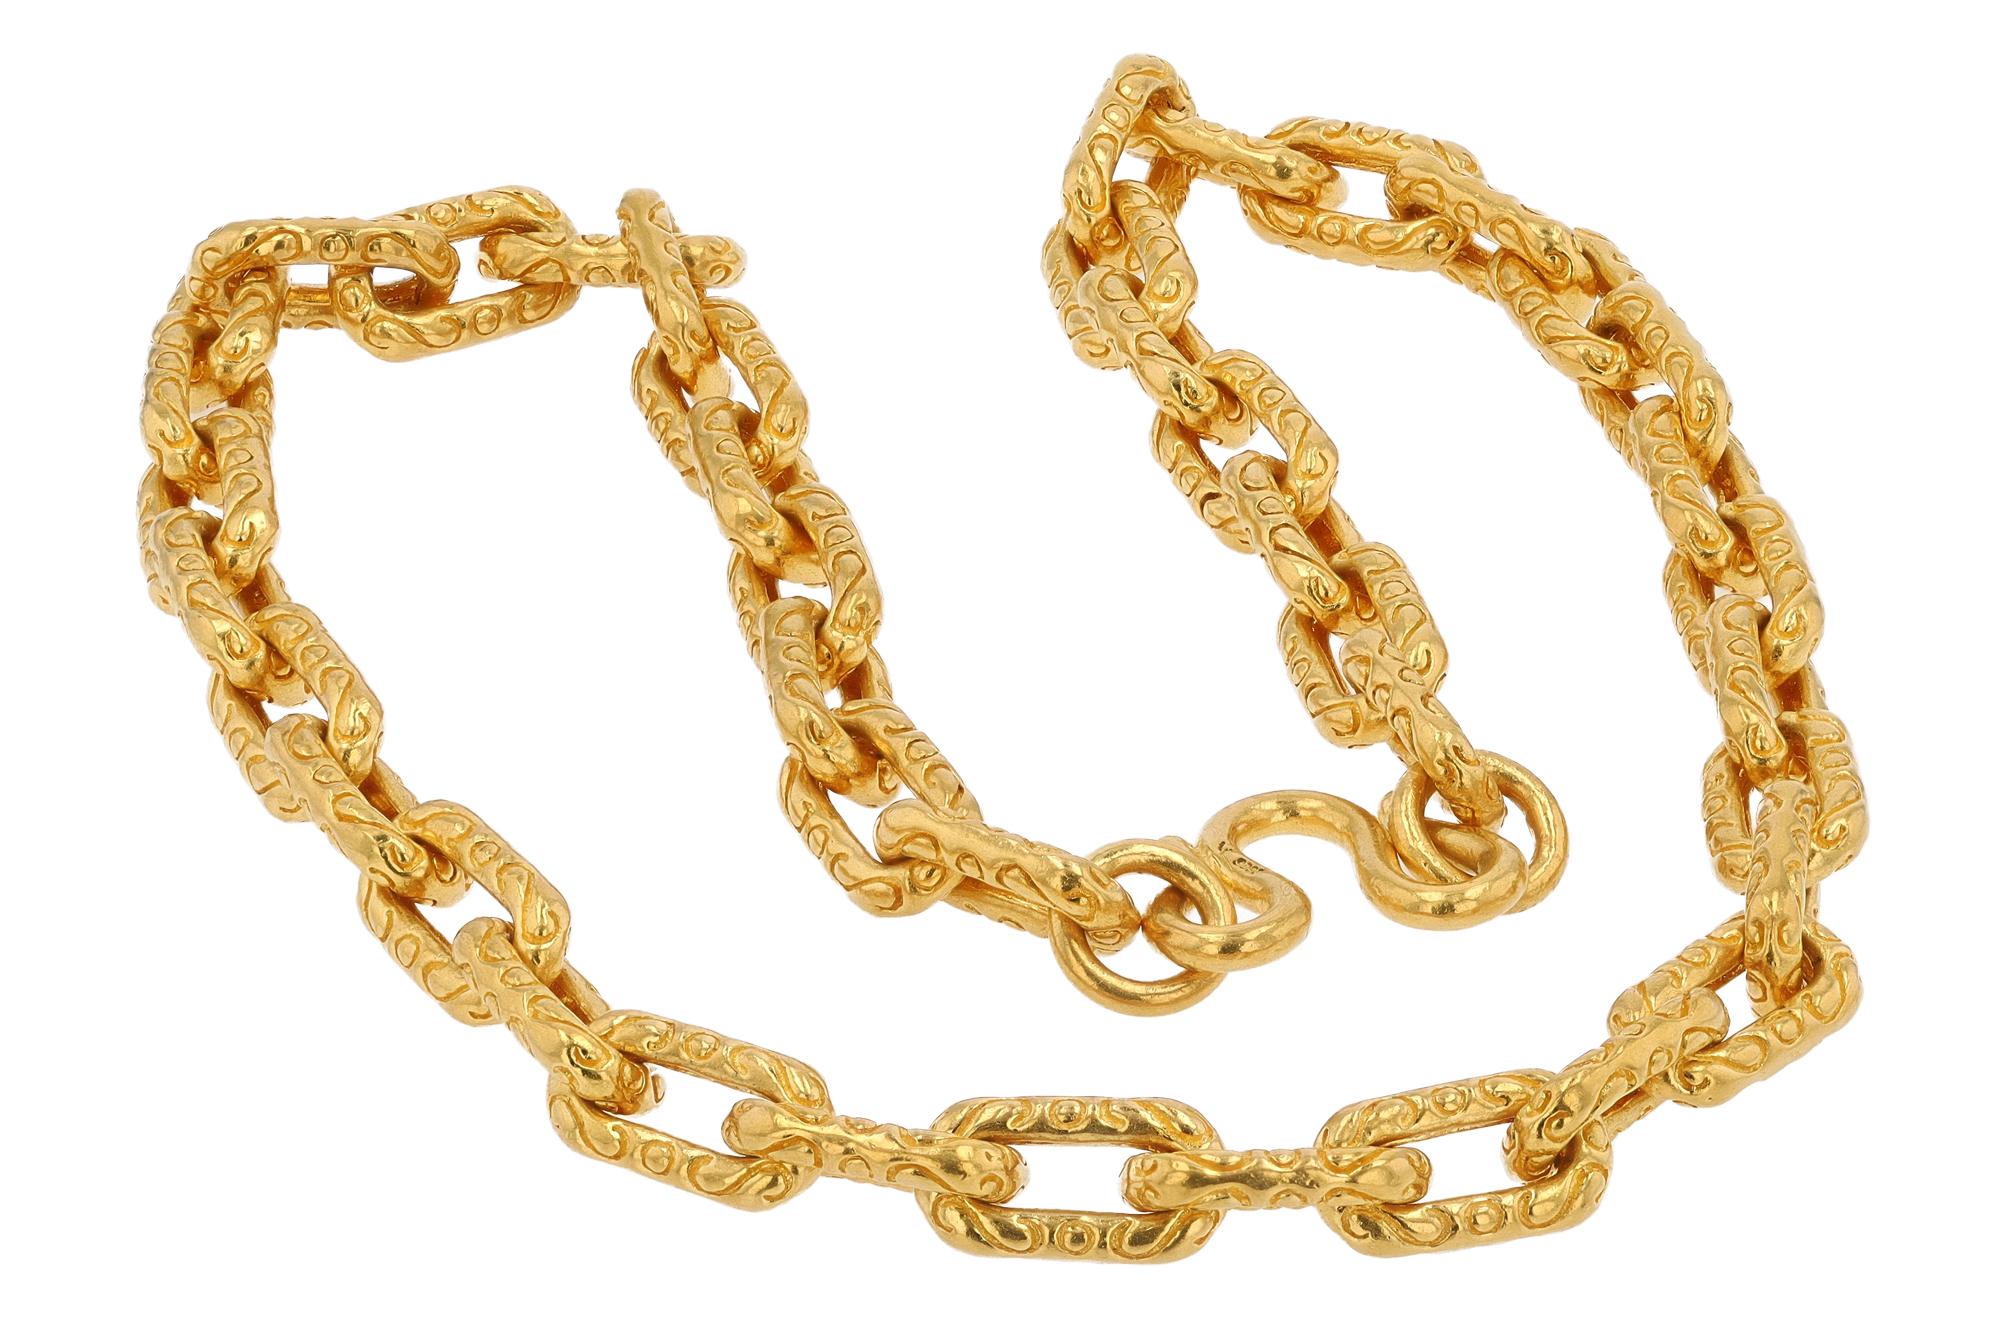 Vintage Heavy 24K Yellow Gold Engraved Chain Link Necklace In Excellent Condition For Sale In Santa Barbara, CA